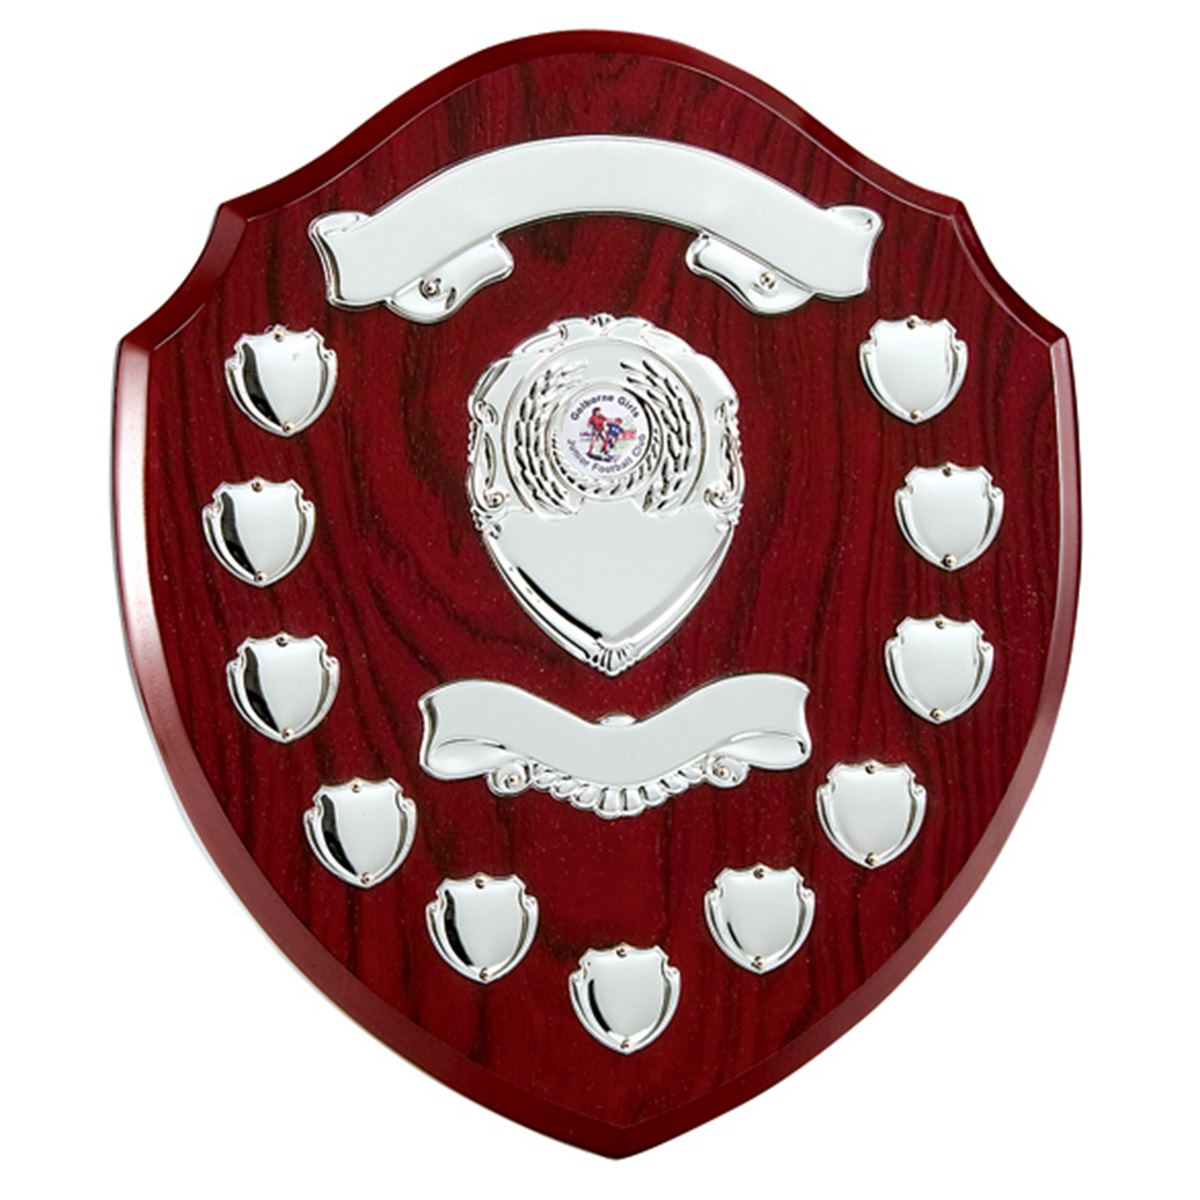 The Supreme Rosewood Annual Shield Award - 11 Side Shields